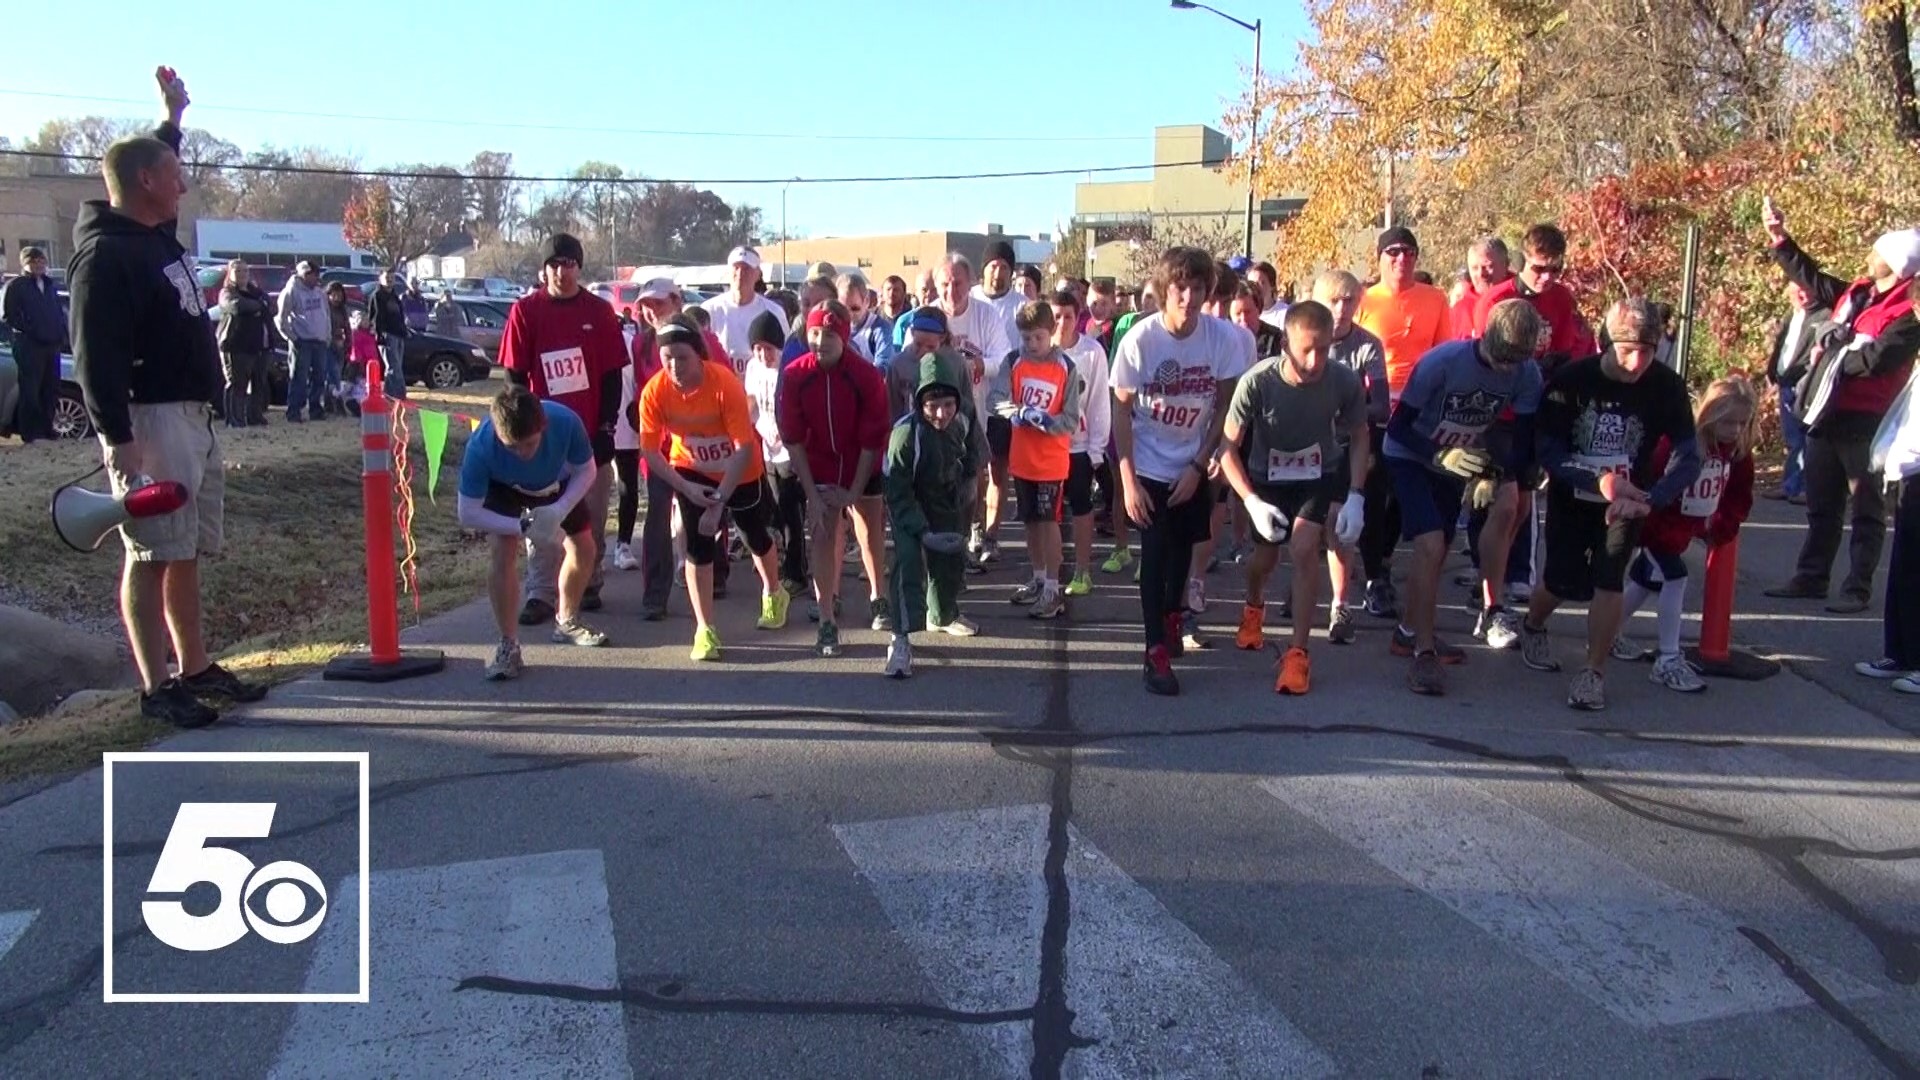 Many participated in the one-mile Turkey Trot fun run on Nov. 17, 2012, in Siloam Springs.